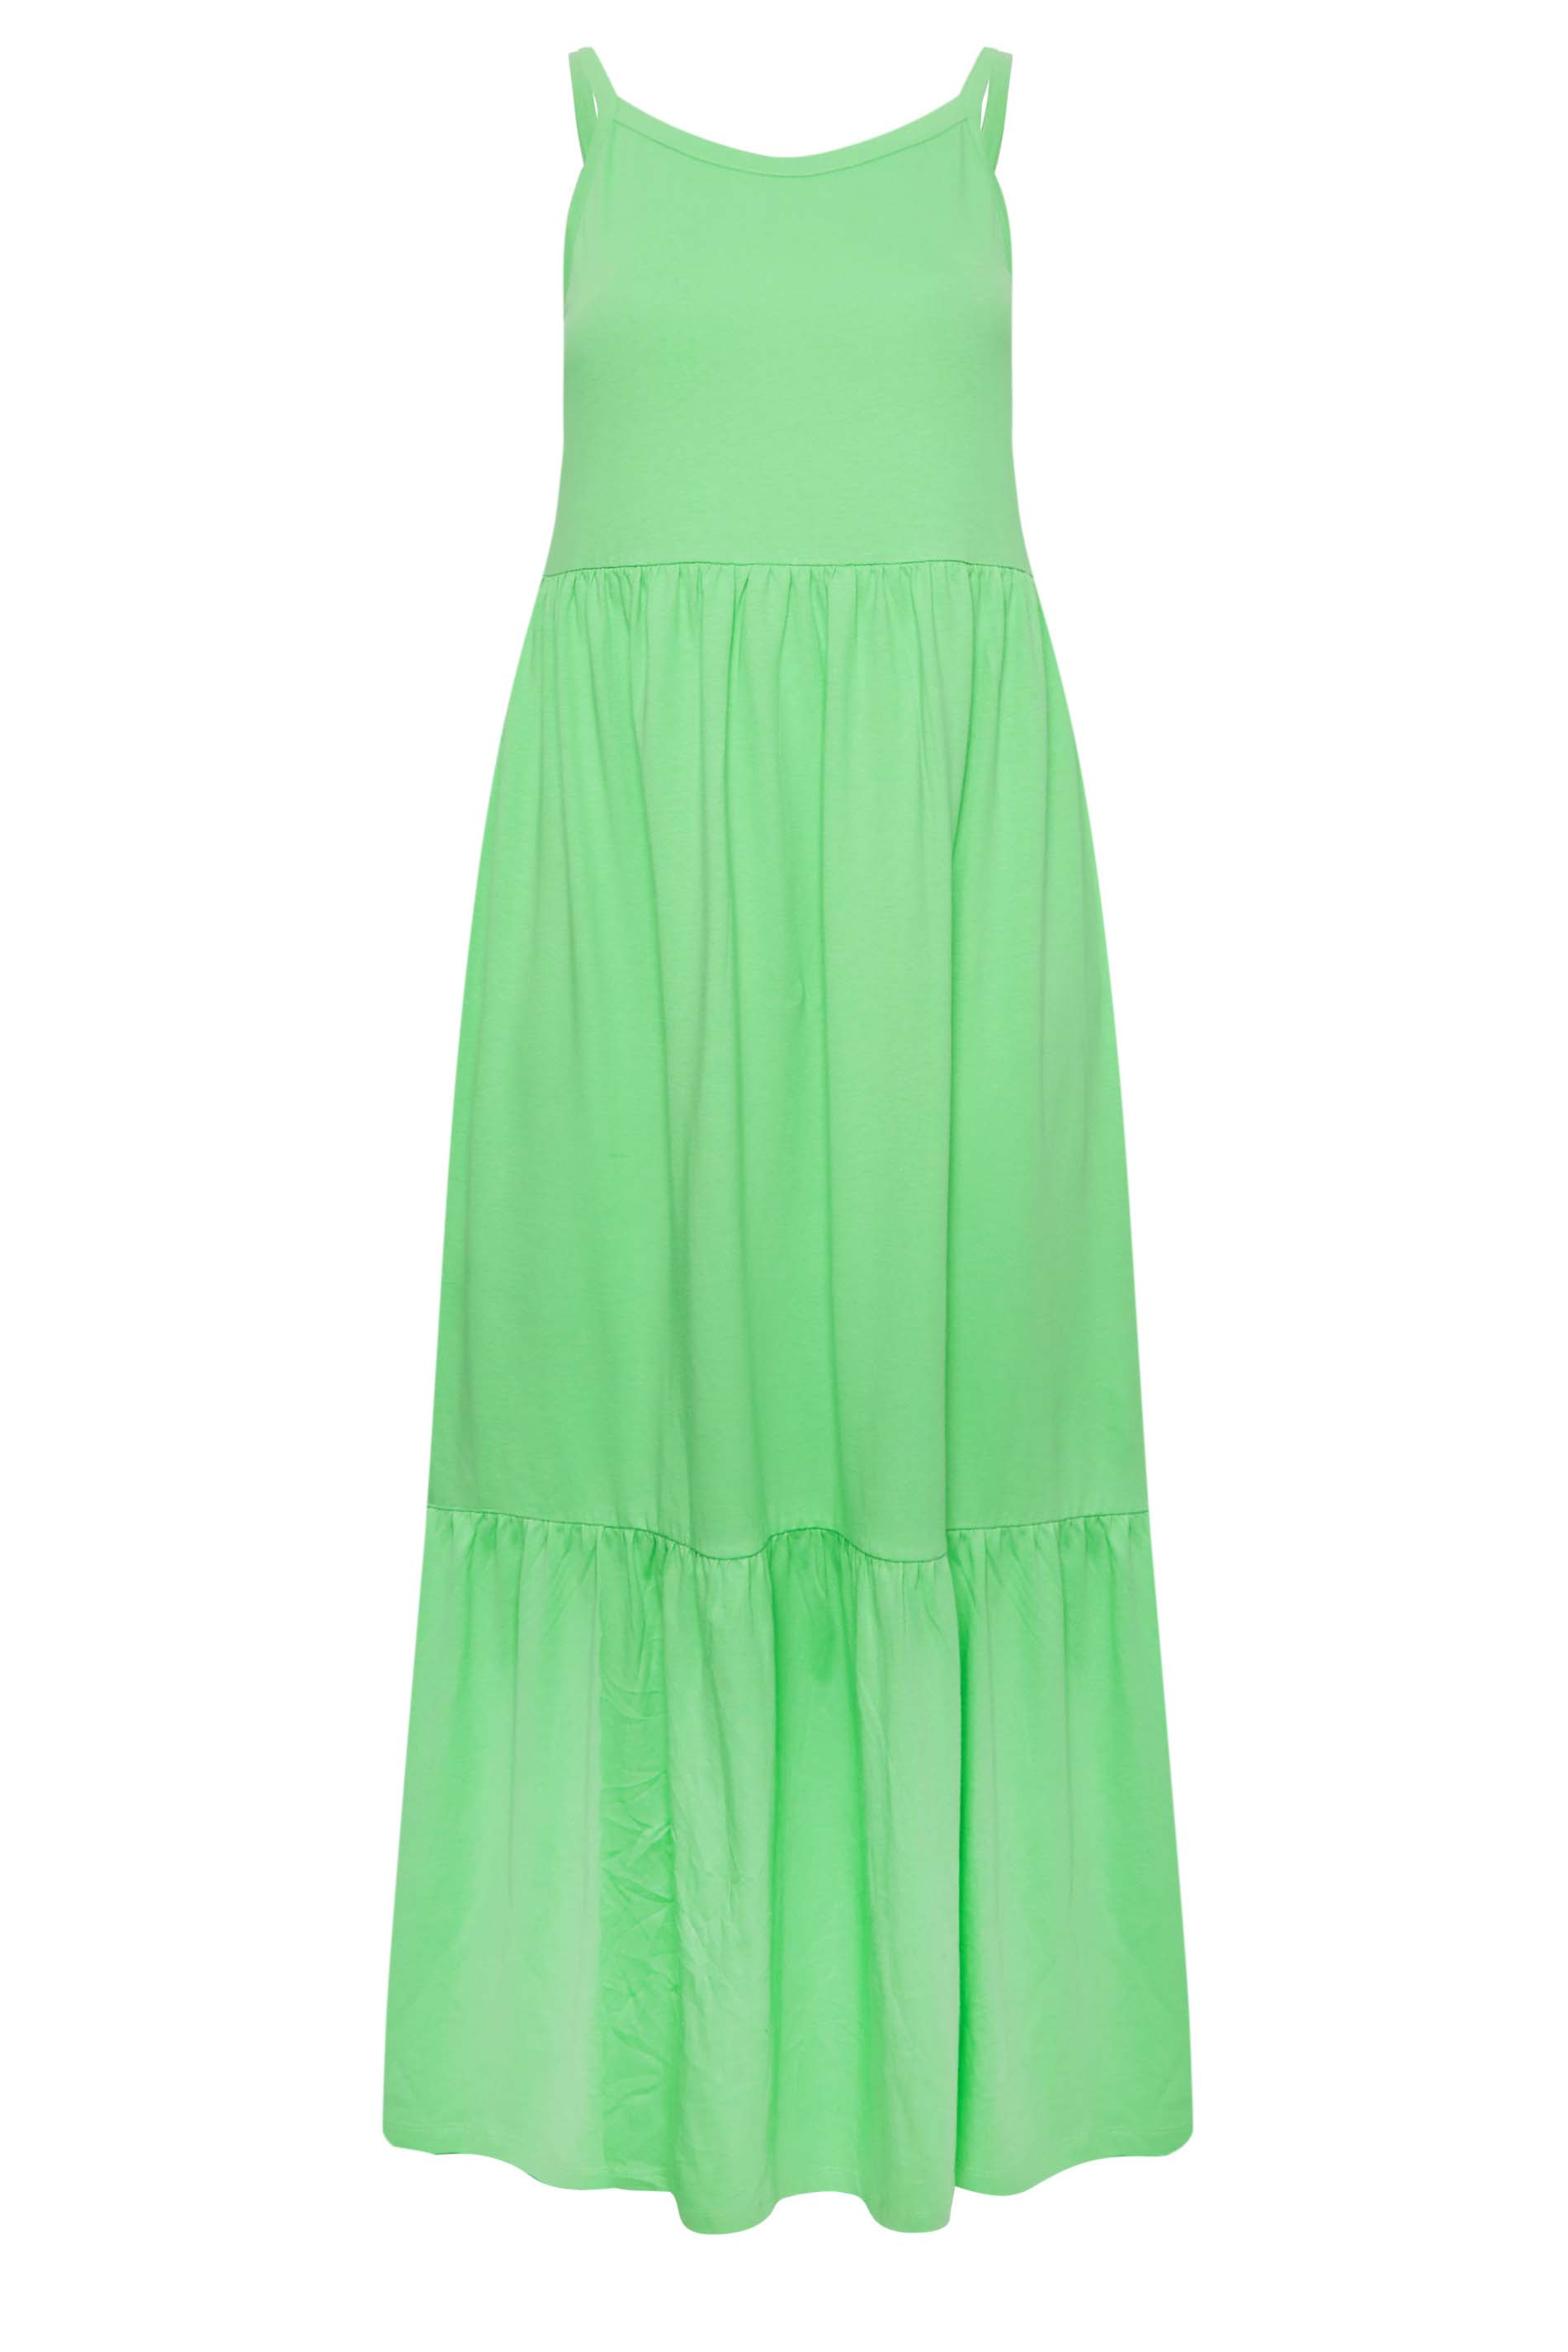 YOURS Curve Plus Size Green Tiered Maxi Sundress | Yours Clothing